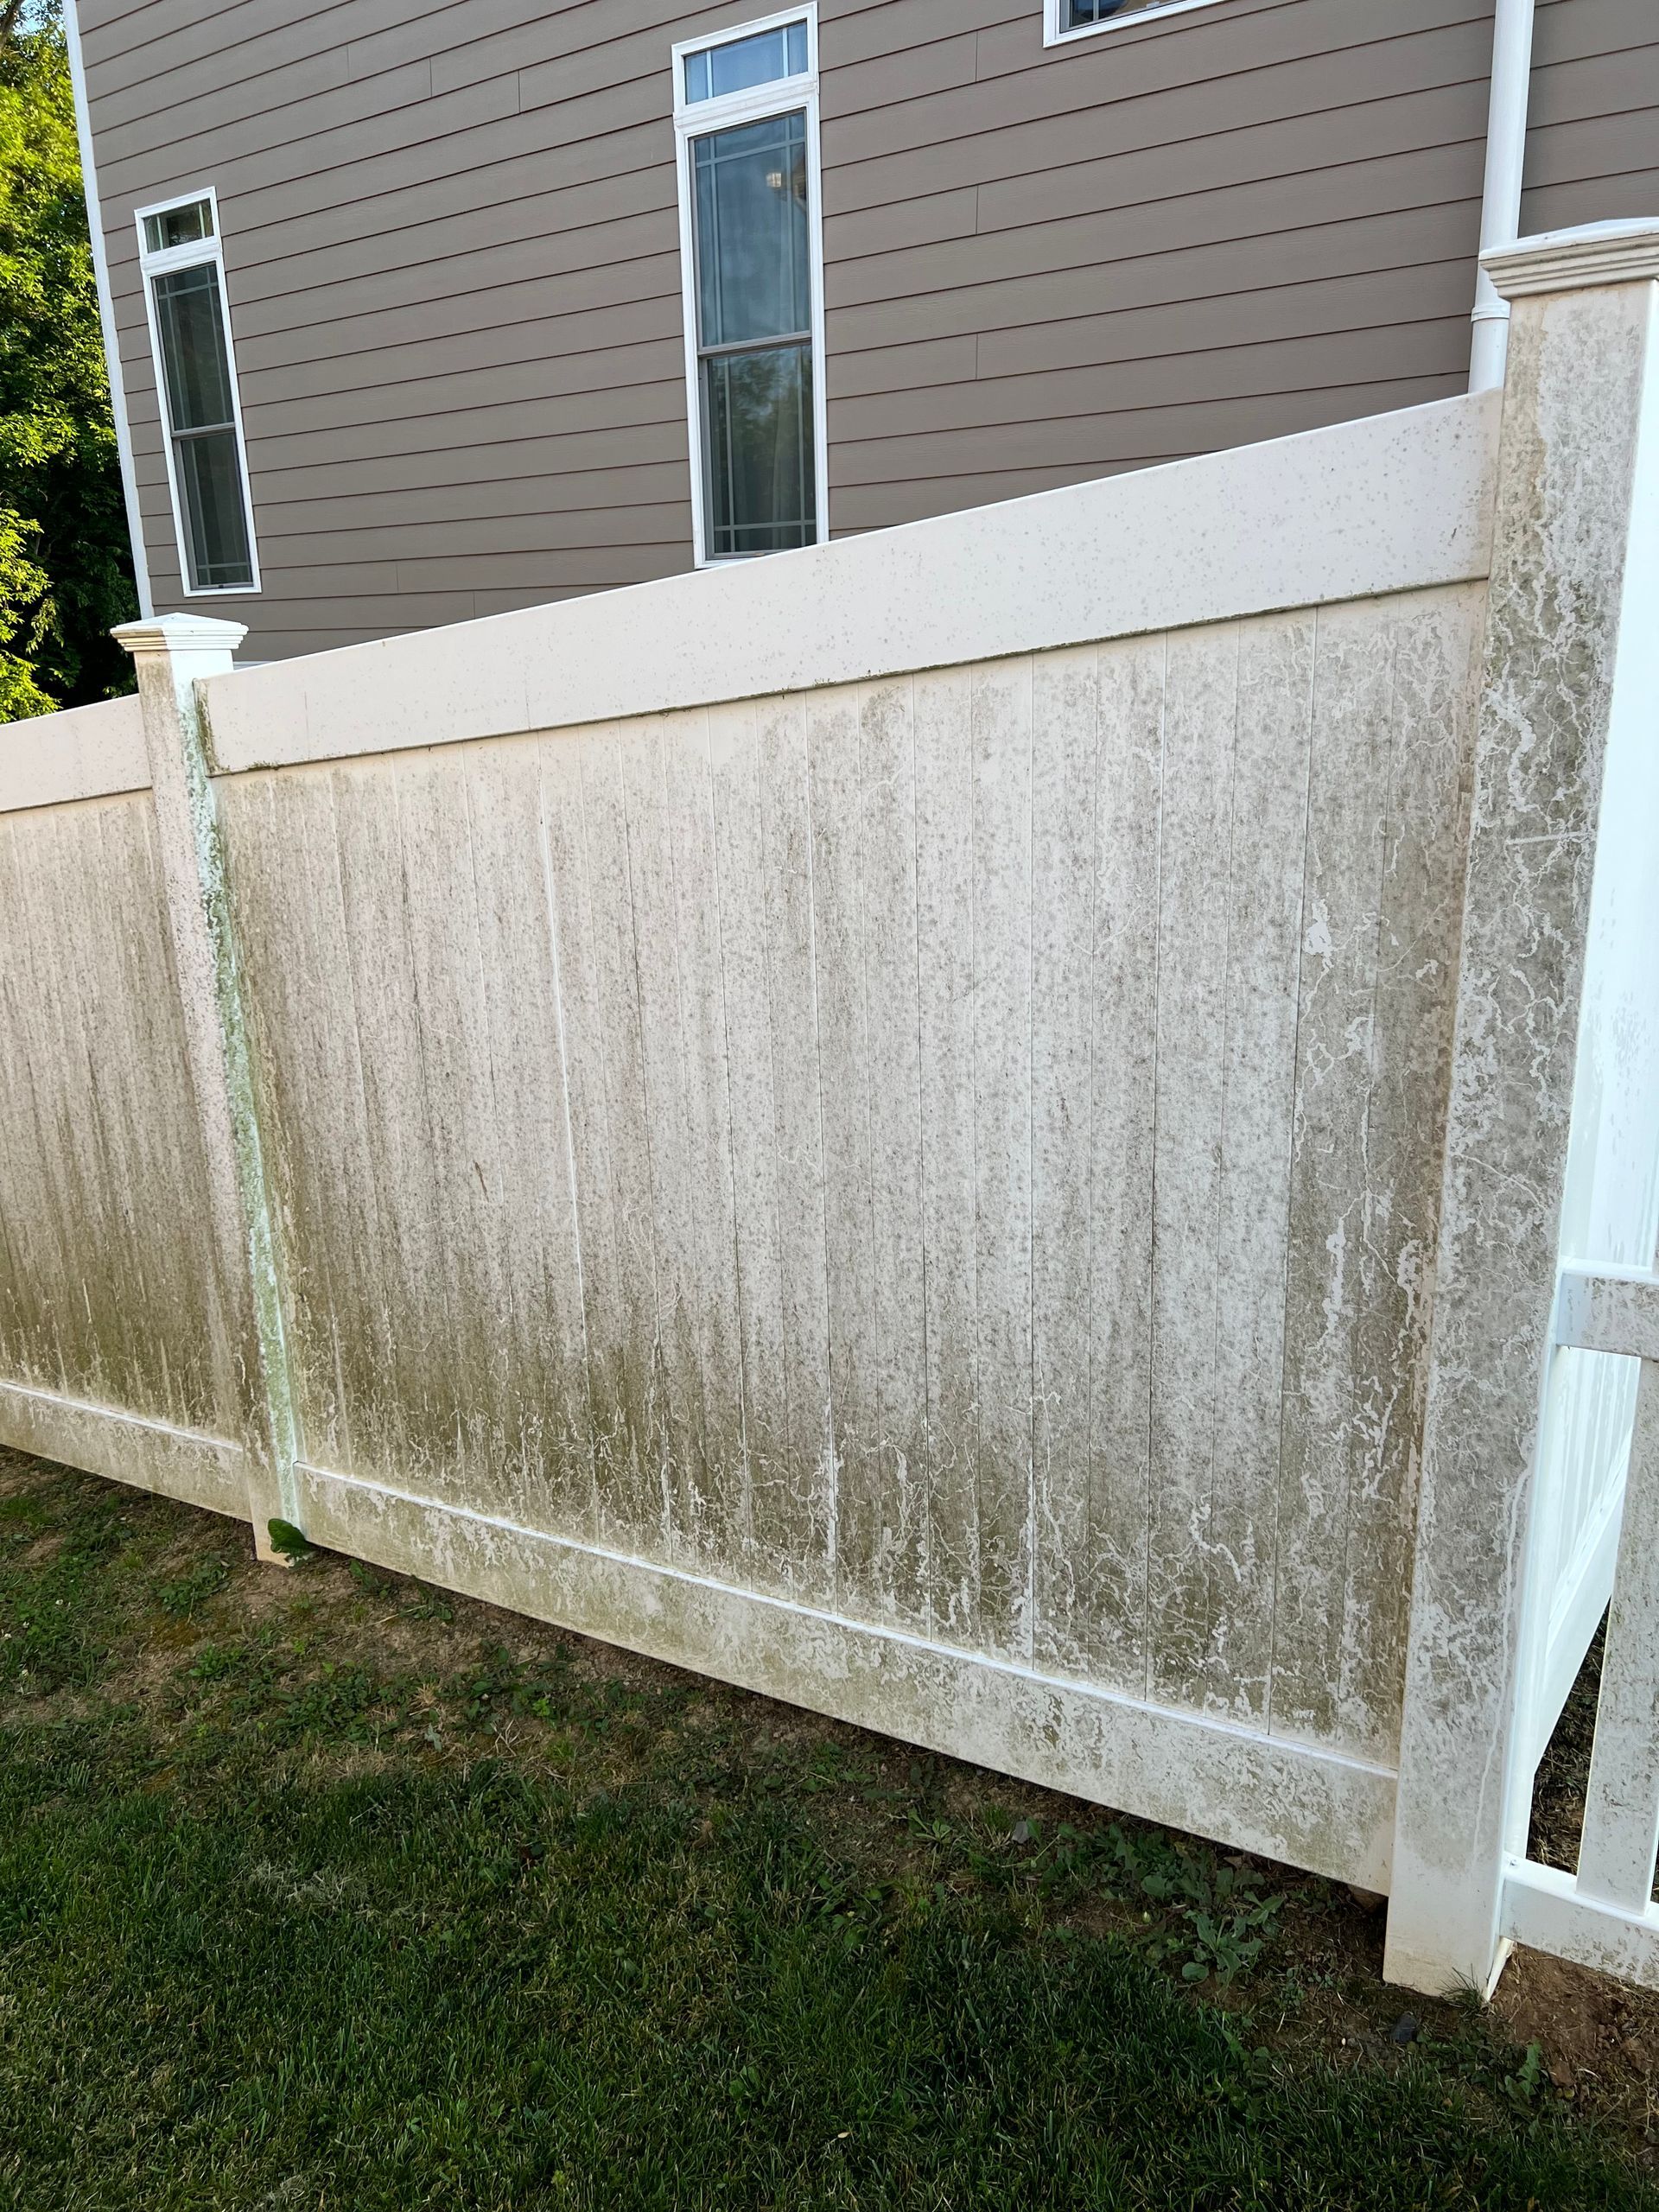 a dirty white fence is sitting in the grass in front of a house .